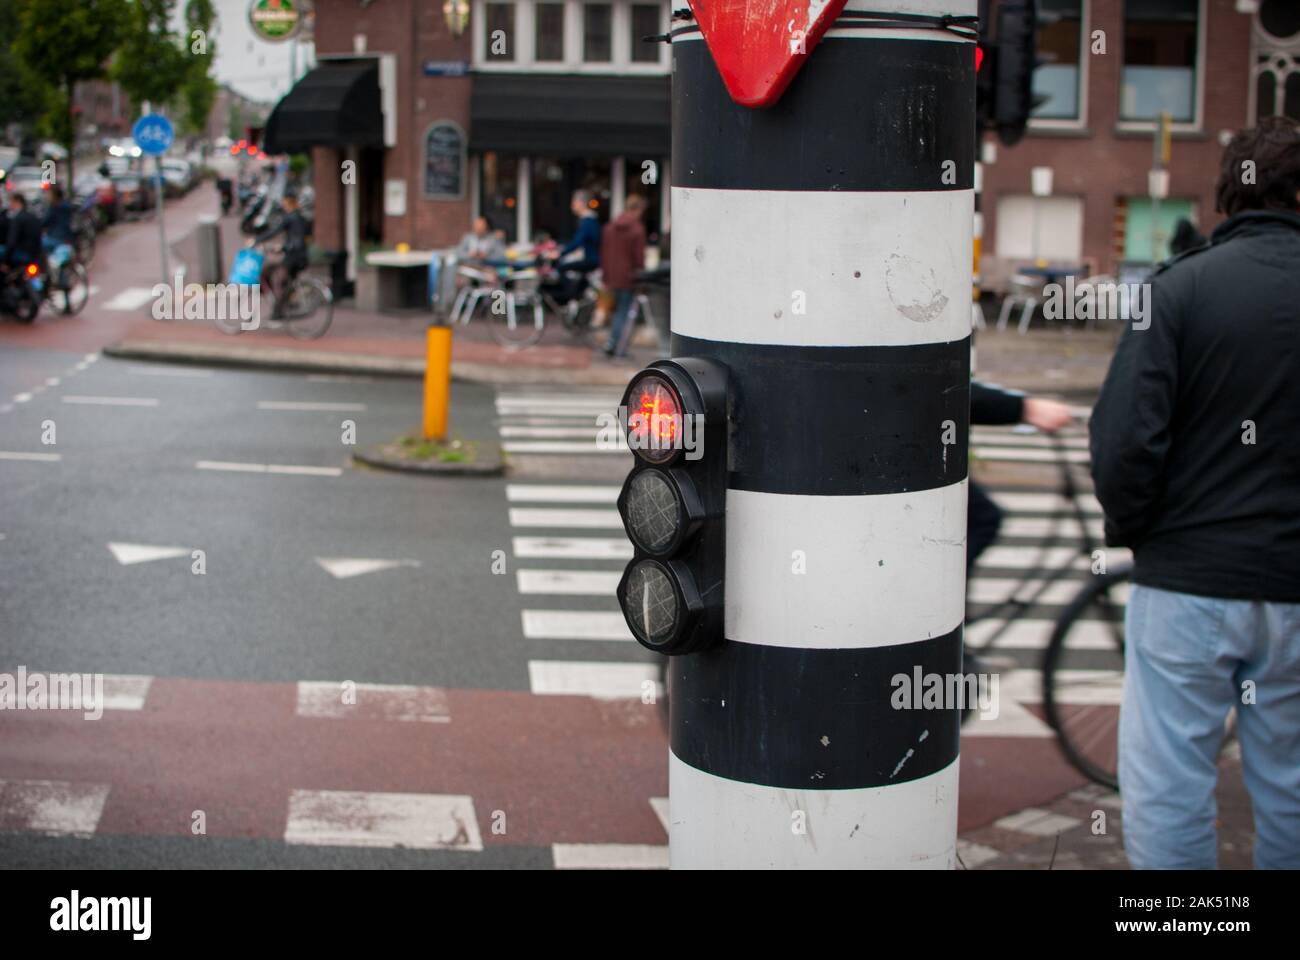 Bicycles on the streets pass by while the traffic light is red Stock Photo